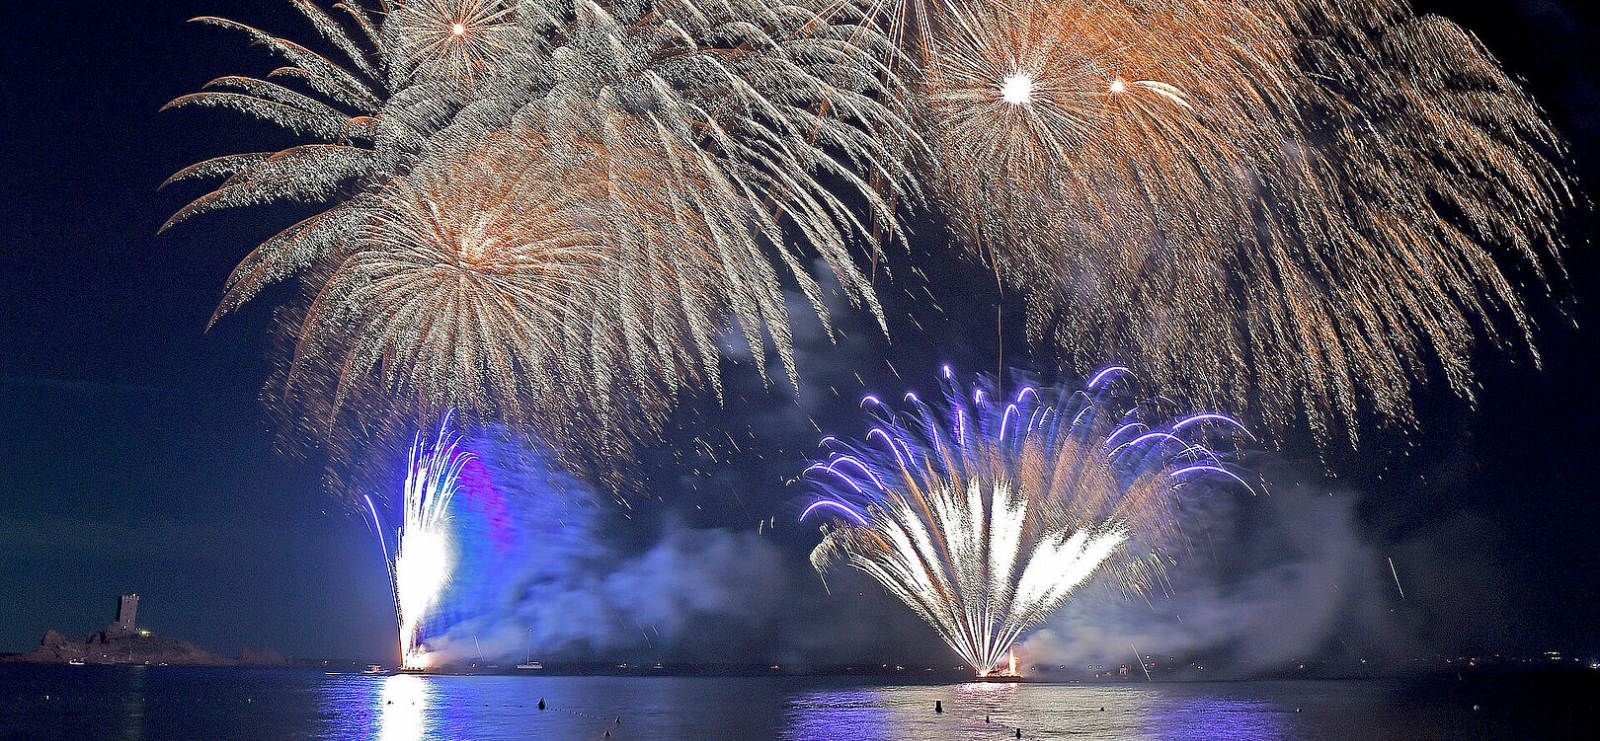 Fireworks on 27th July